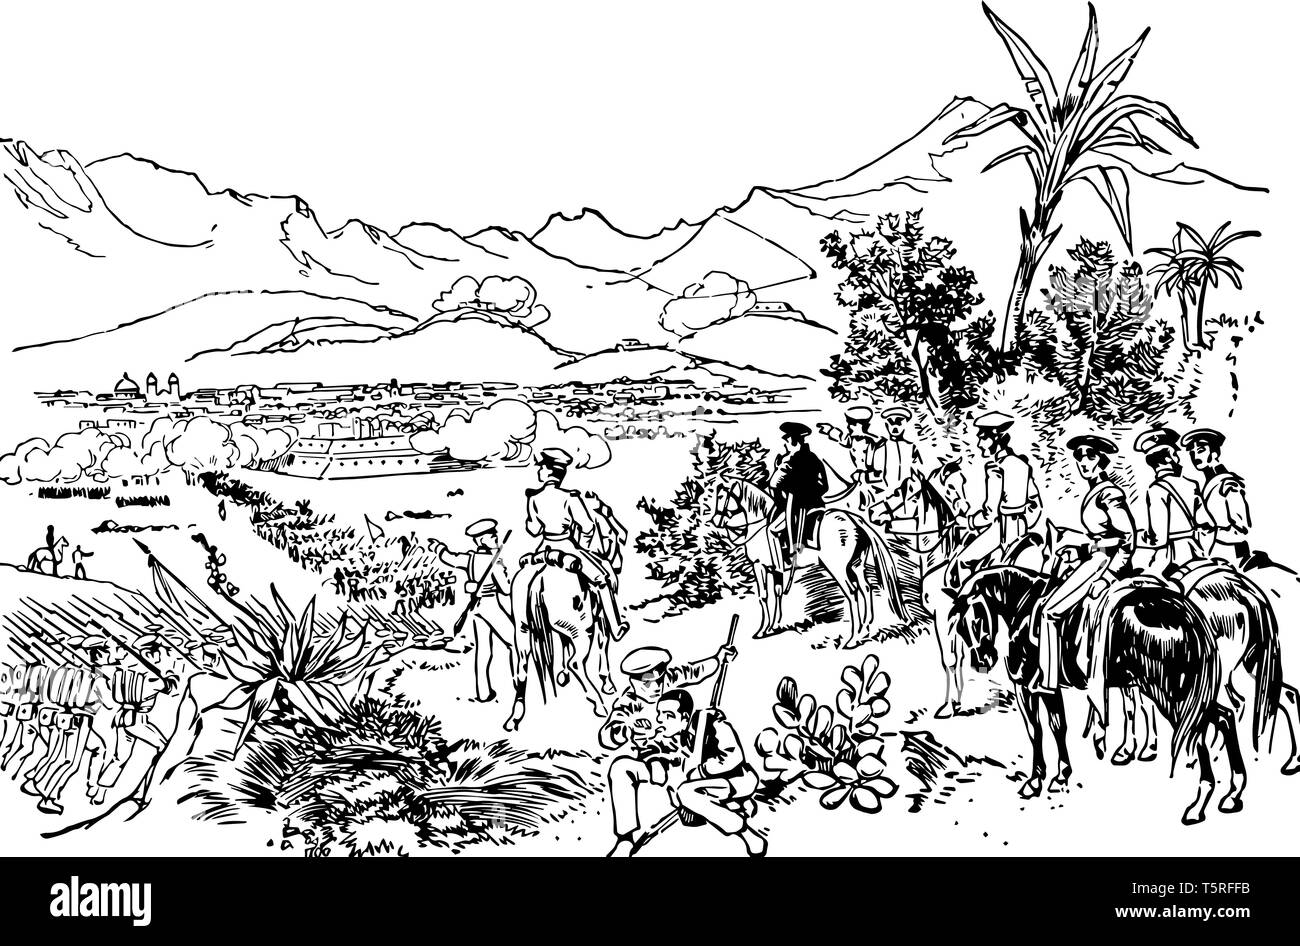 General taylor was leading soilders in the attack on northeren mexico city in the monterery in American-Mexican war vintage line drawing. Stock Vector